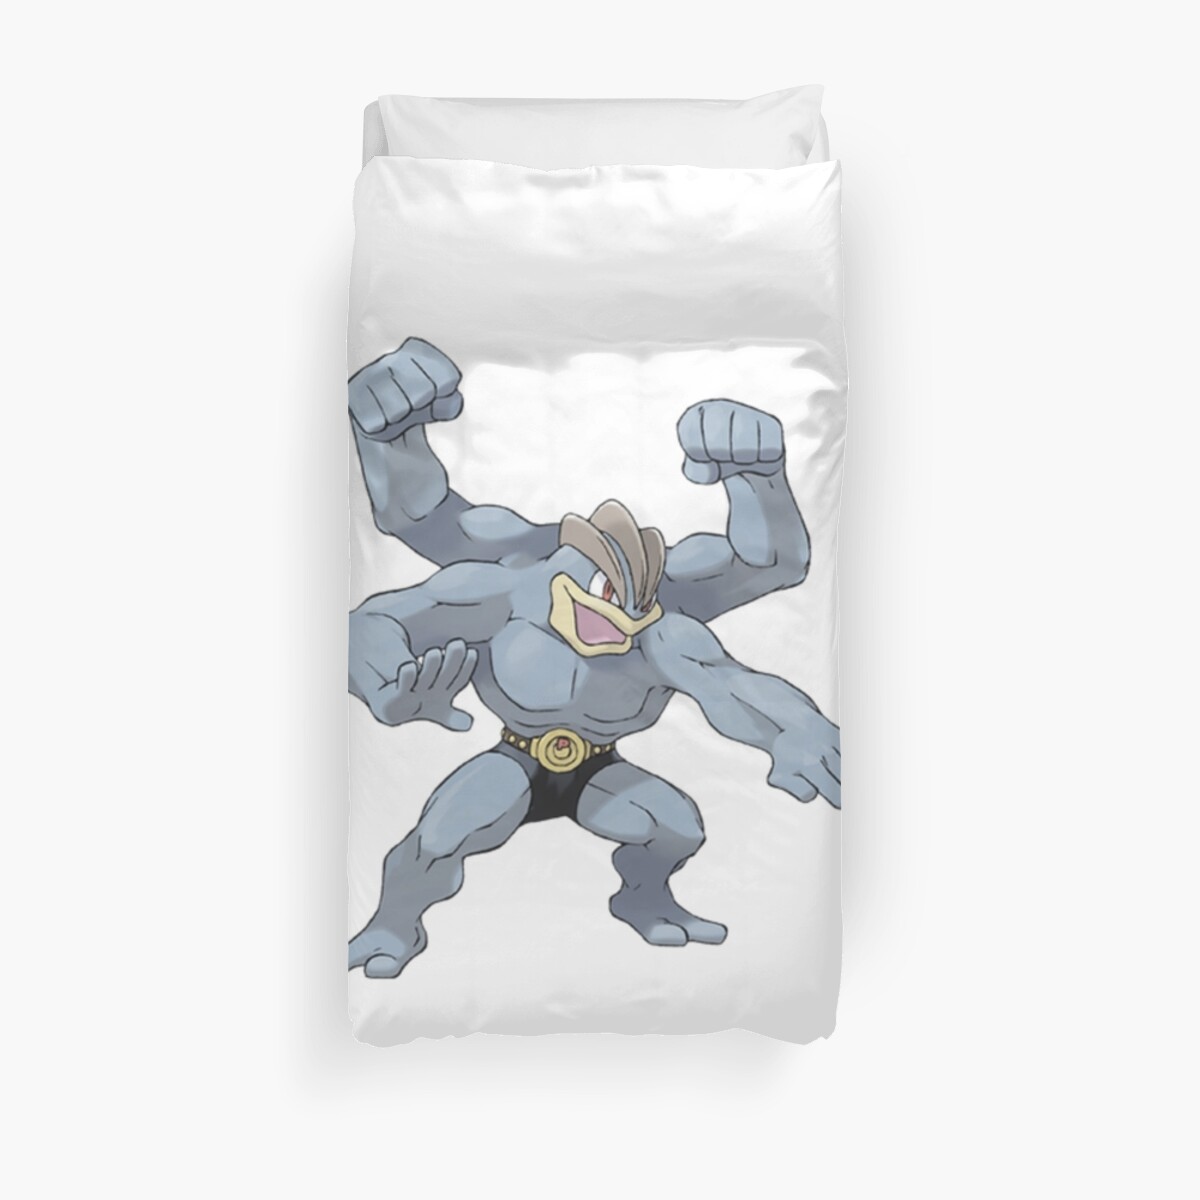 Machamp Extra Large Hires Design Duvet Cover By Kmd1221 Redbubble